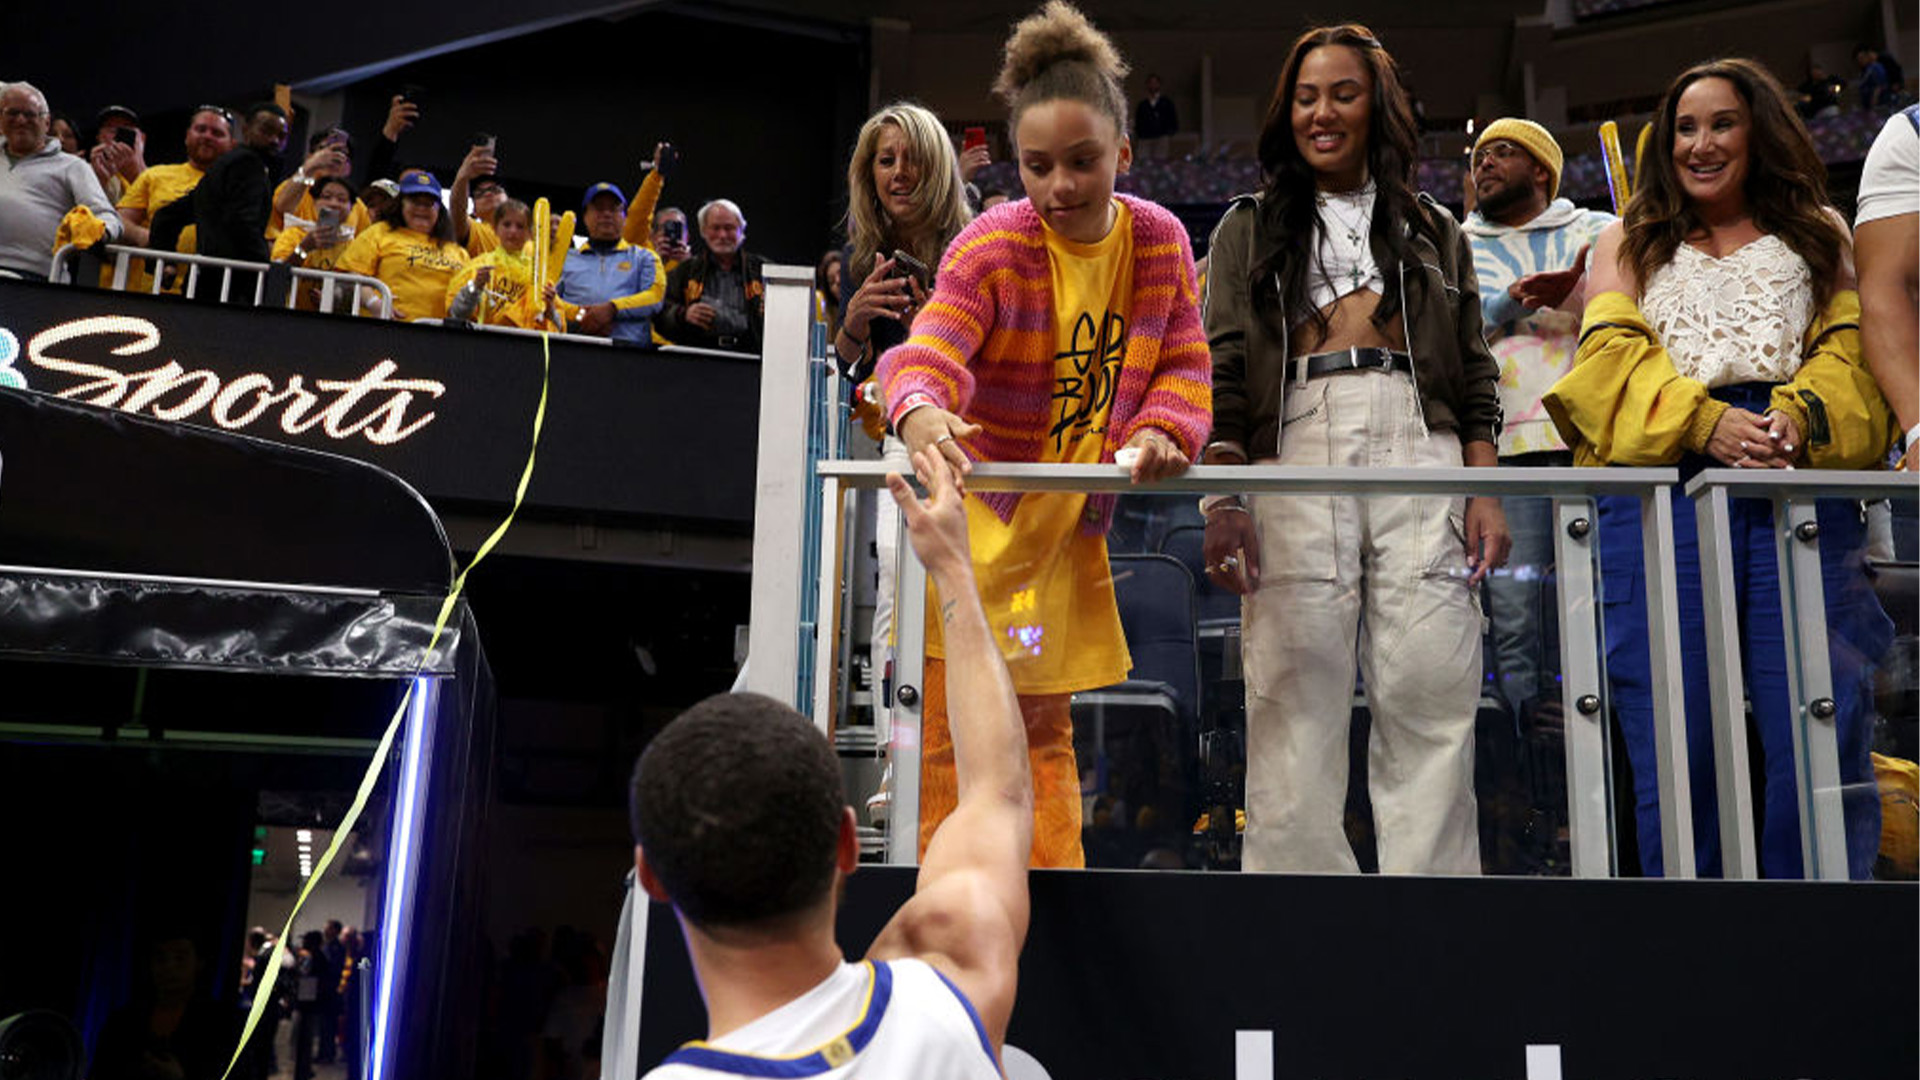 How Stephen Curry’s Daughter Riley Played A Role In His Lucrative Endorsement Deal With Under Armour